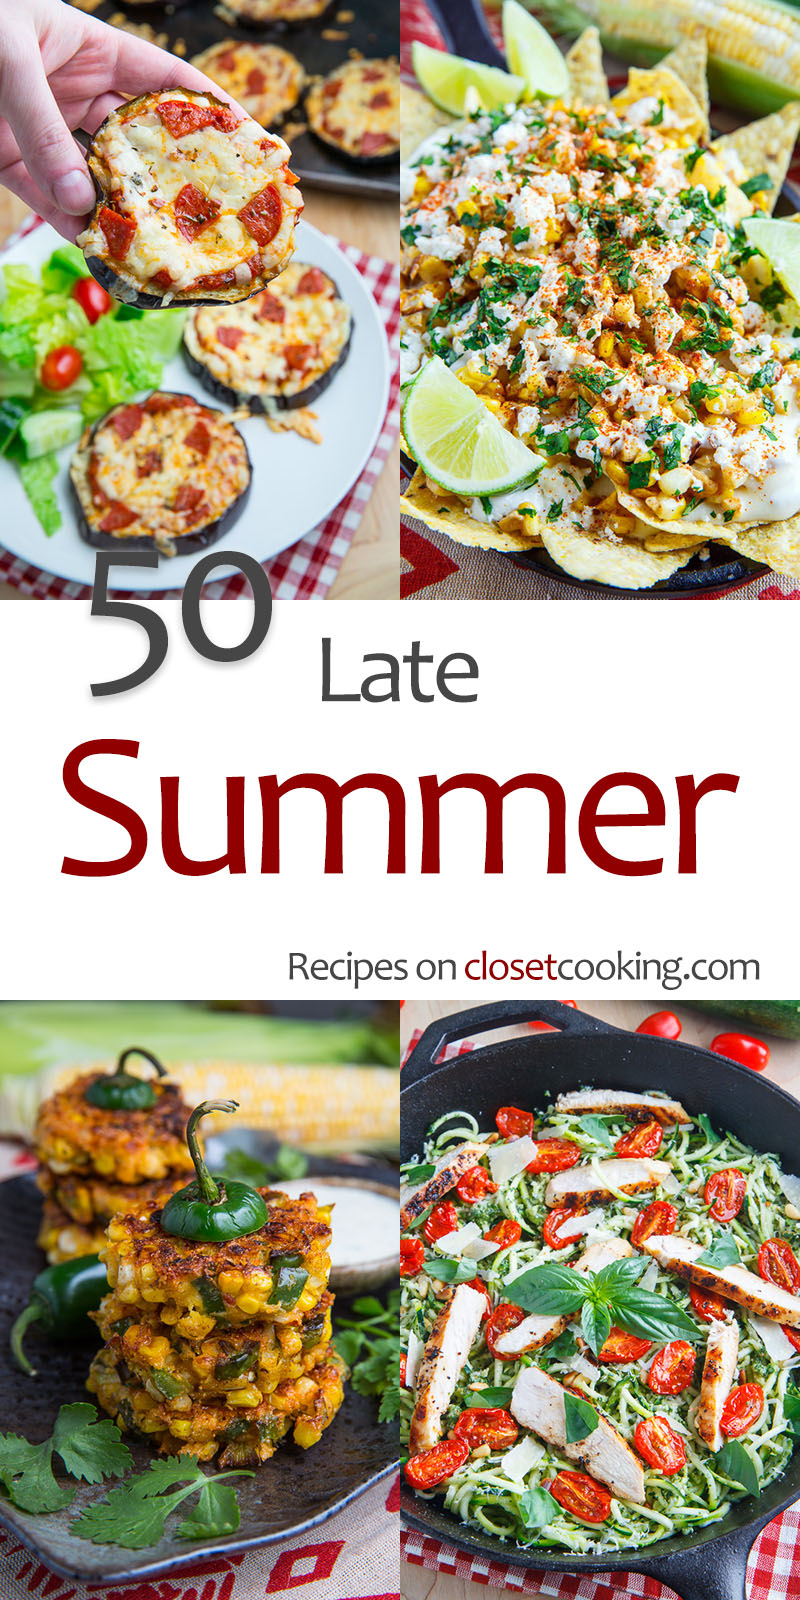 50 Late Summer Recipes